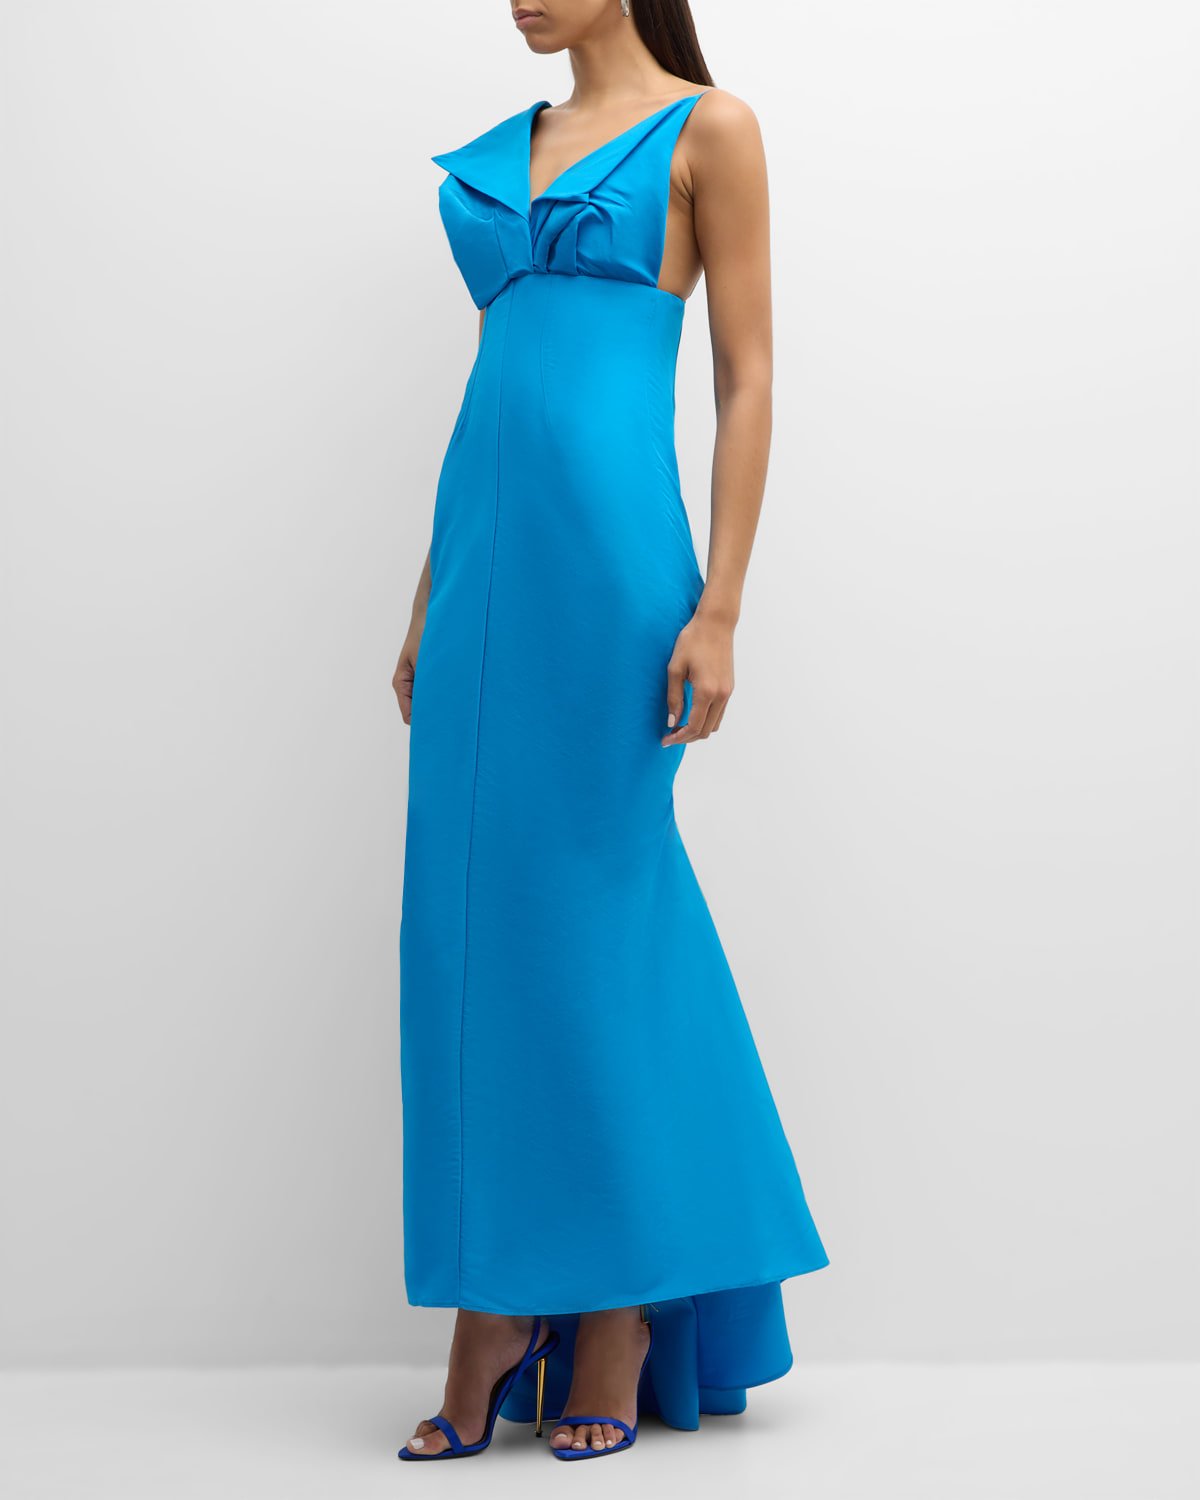 CHRISTOPHER JOHN ROGERS CRUSHED BUST TRUMPET GOWN WITH TIE BACK DETAIL